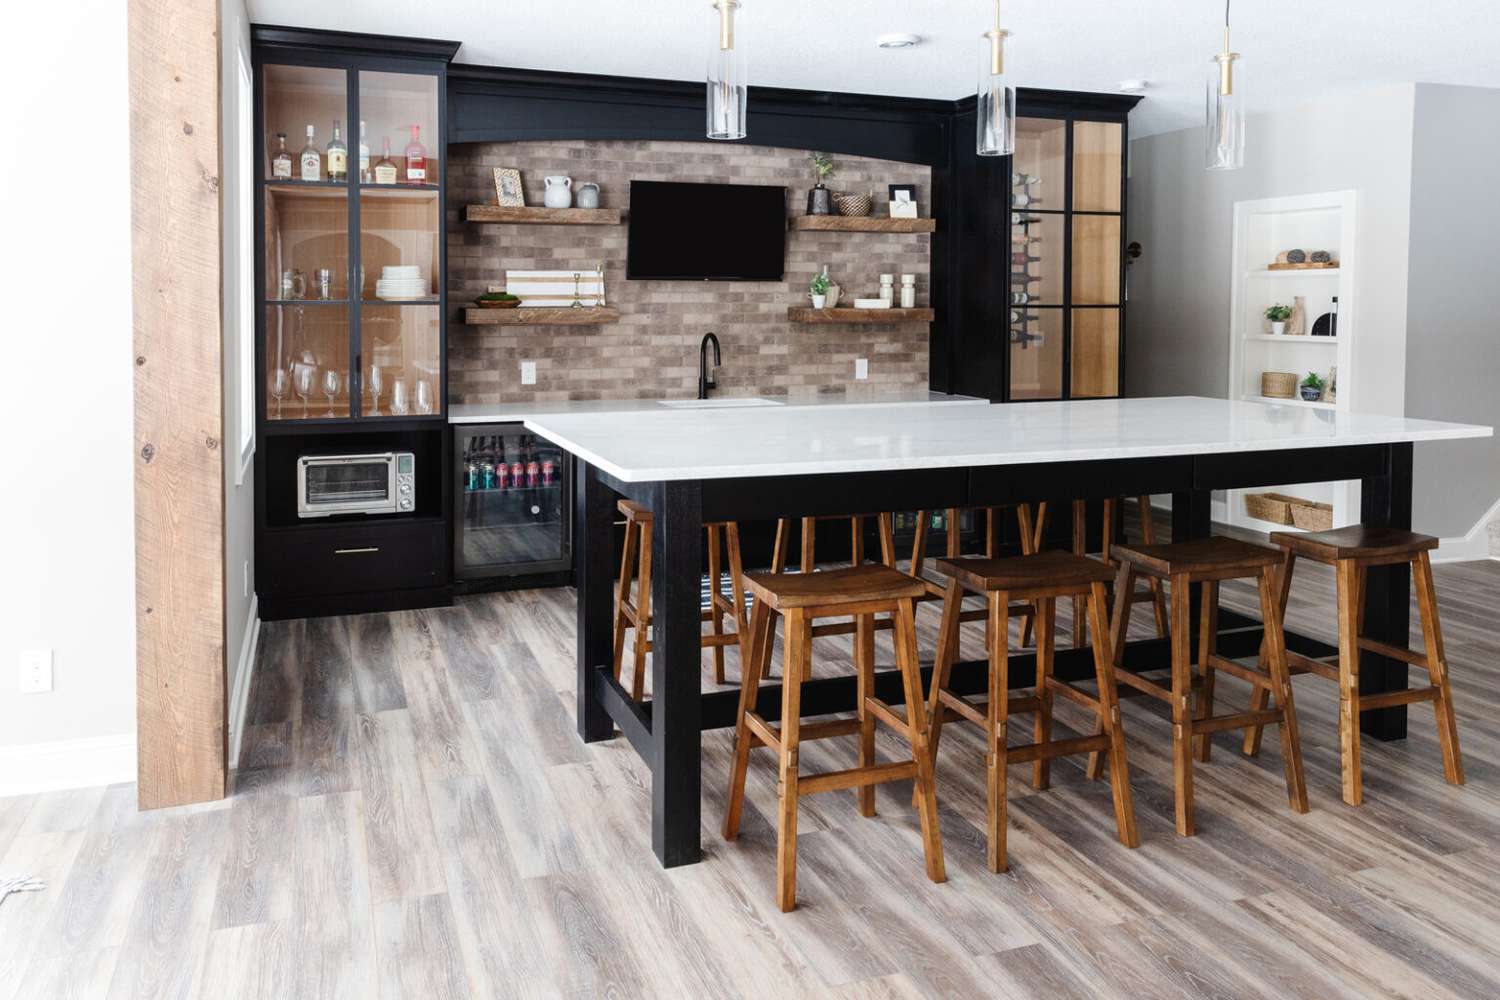 black cabinets and stone